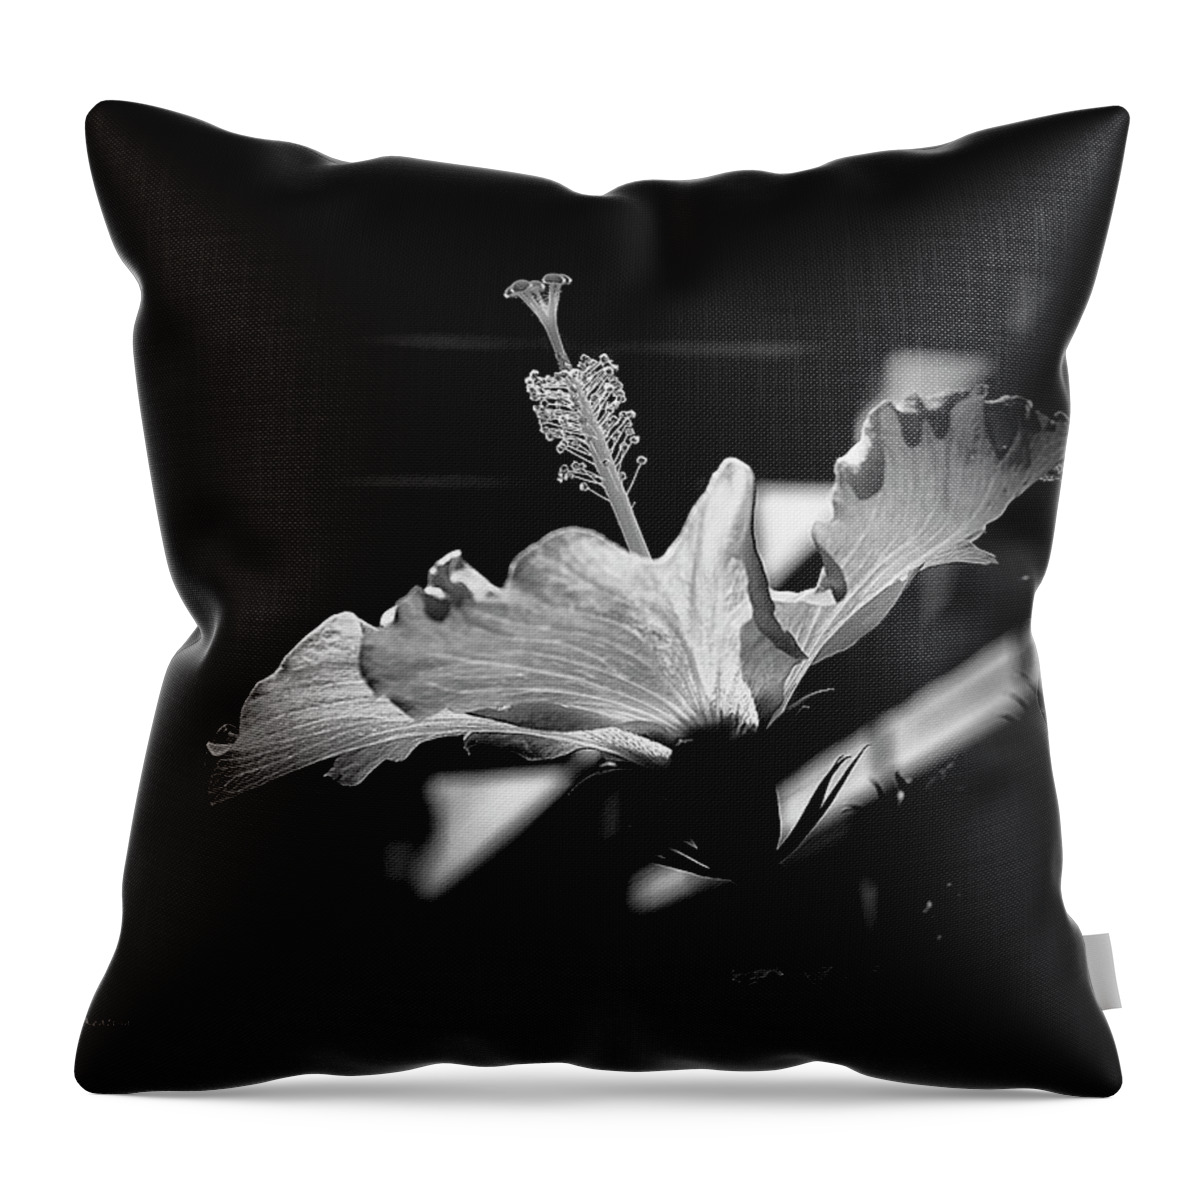 Floral Throw Pillow featuring the photograph The Delicate Hibiscus Flower by Gerlinde Keating